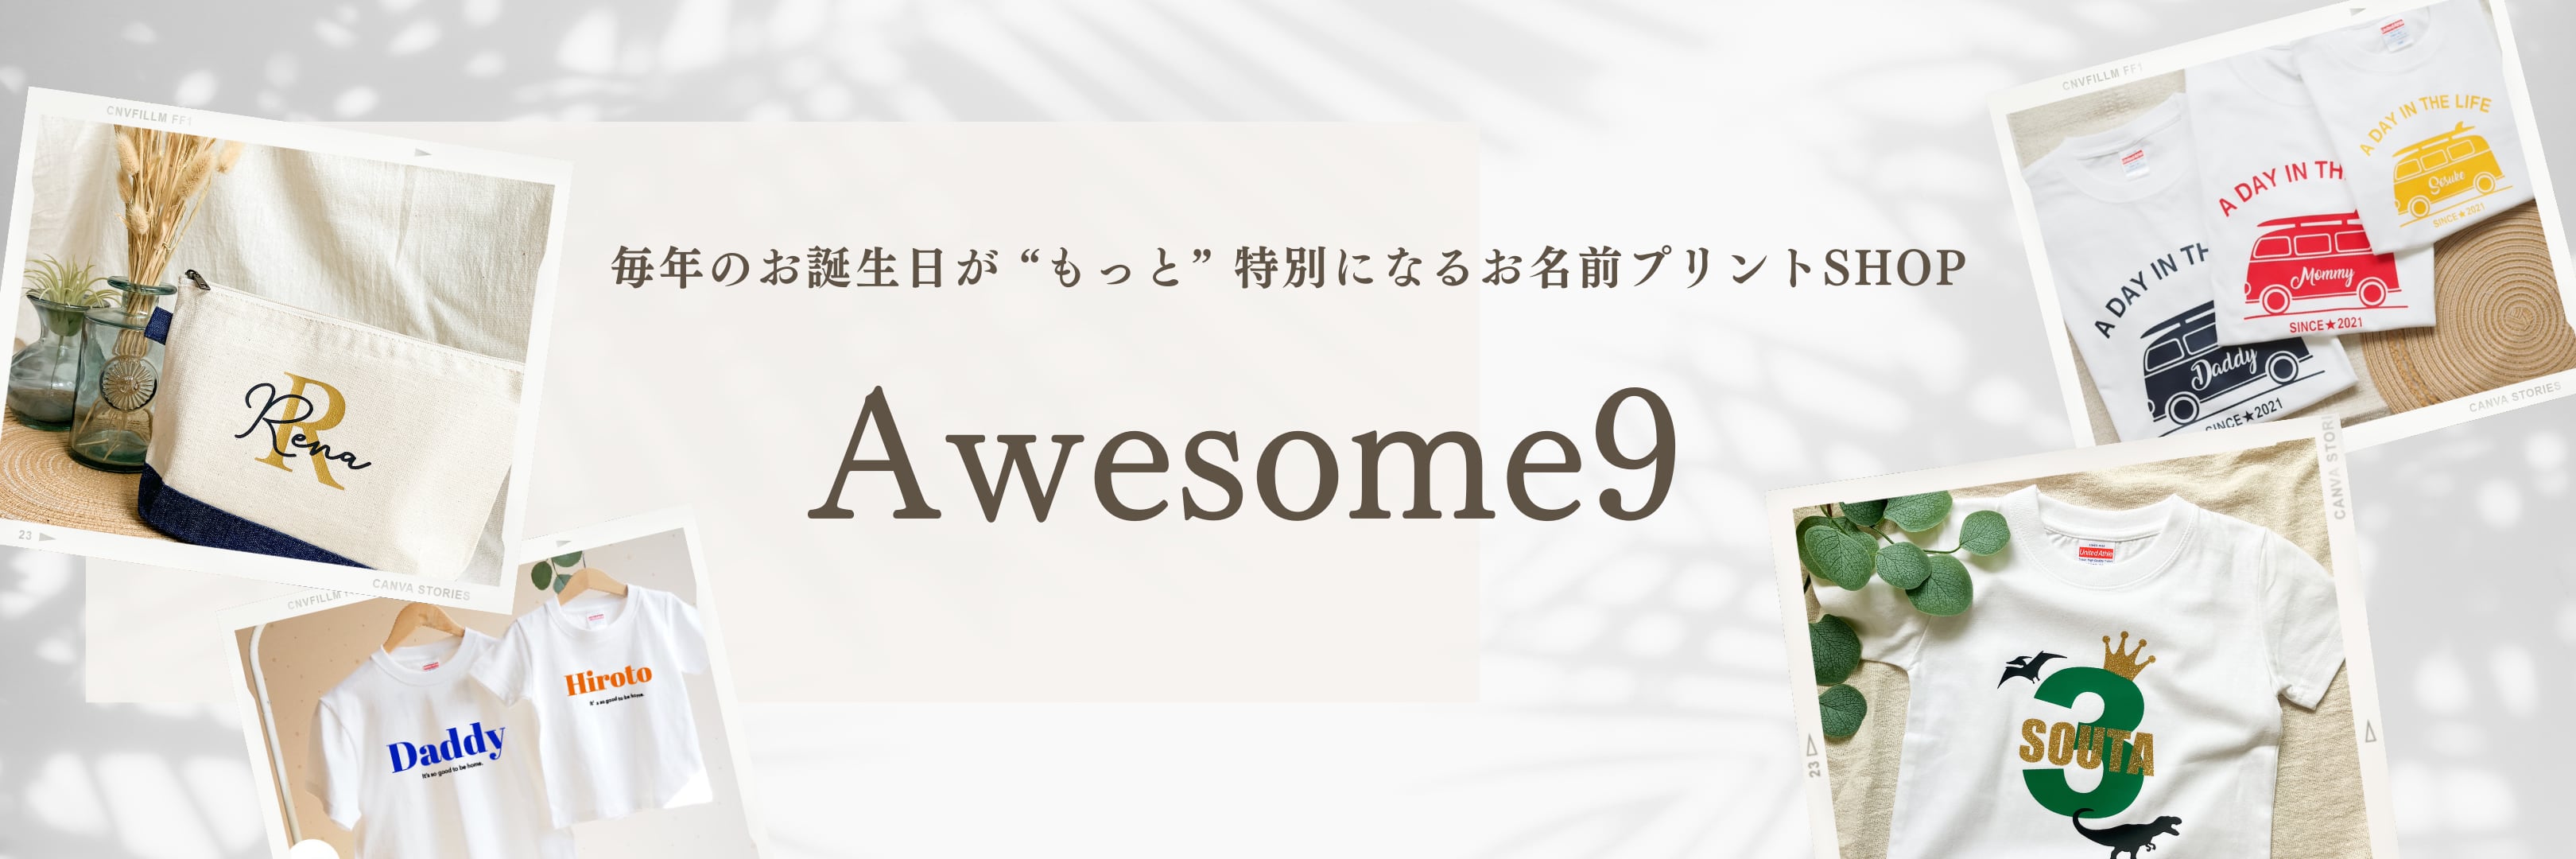 Awesome9 (オーサムナイン)